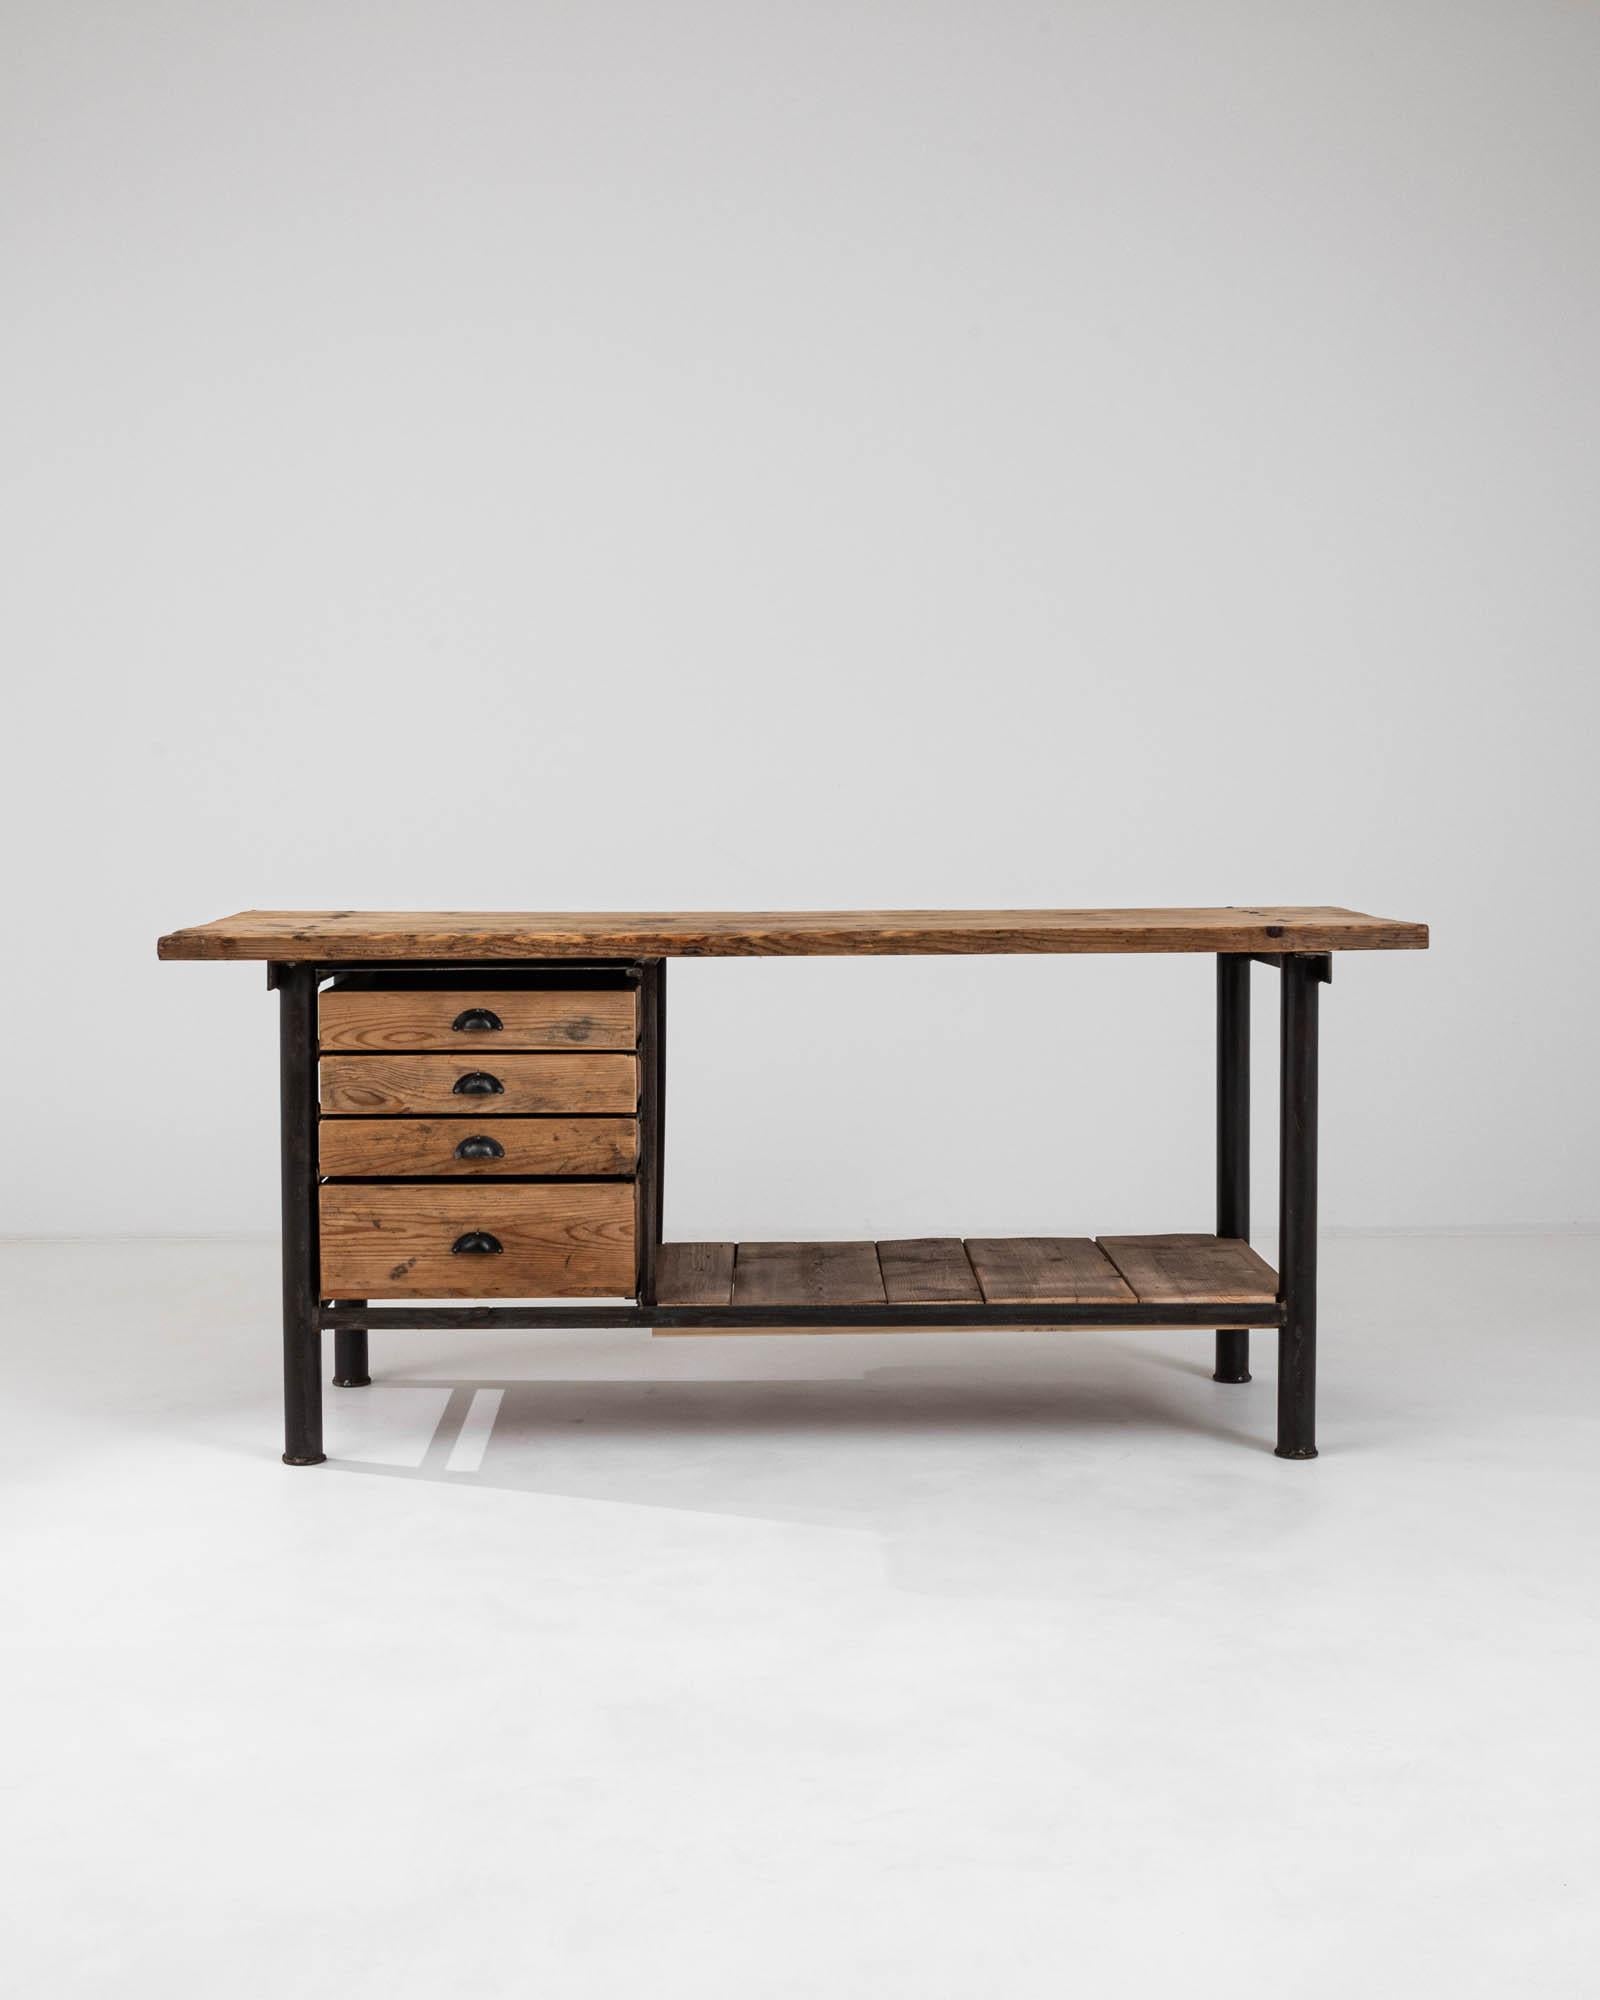 This sturdy and industrial 20th Century French Work Table merges functionality with the raw aesthetic of its era. The robust metal frame provides a solid foundation, supporting the richly textured wooden top and shelves that exude character and